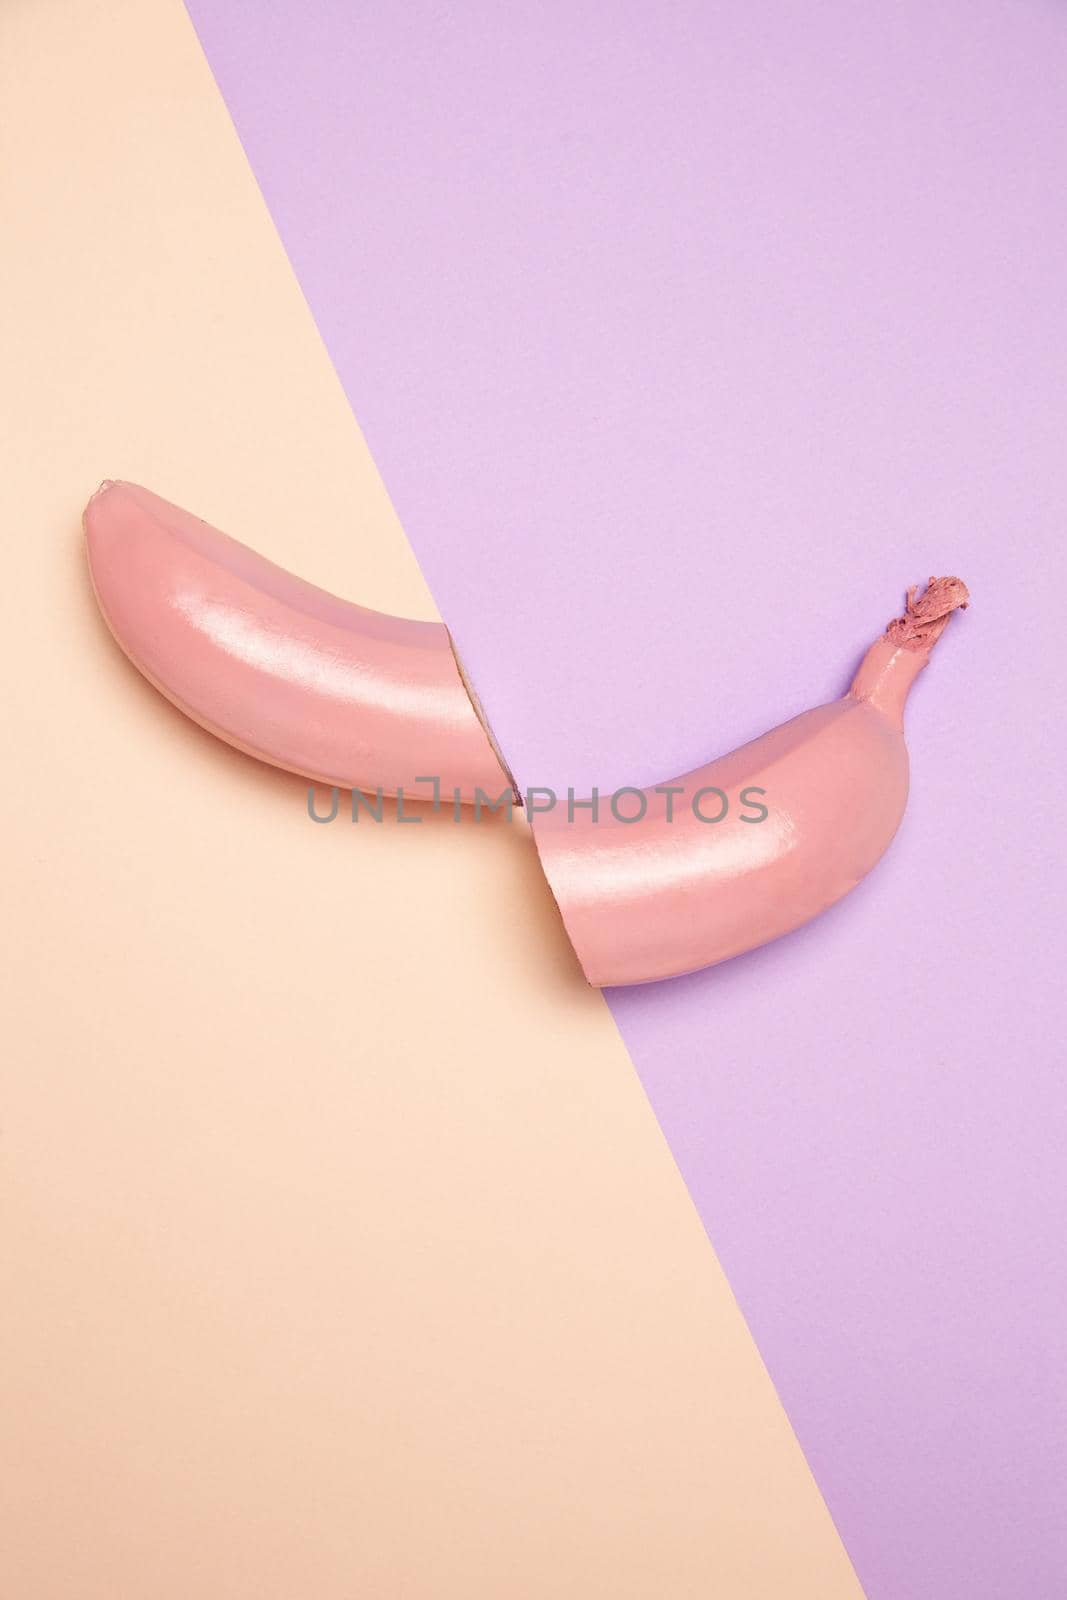 Halved unpeeled pink banana placed on two color surface by Julenochek